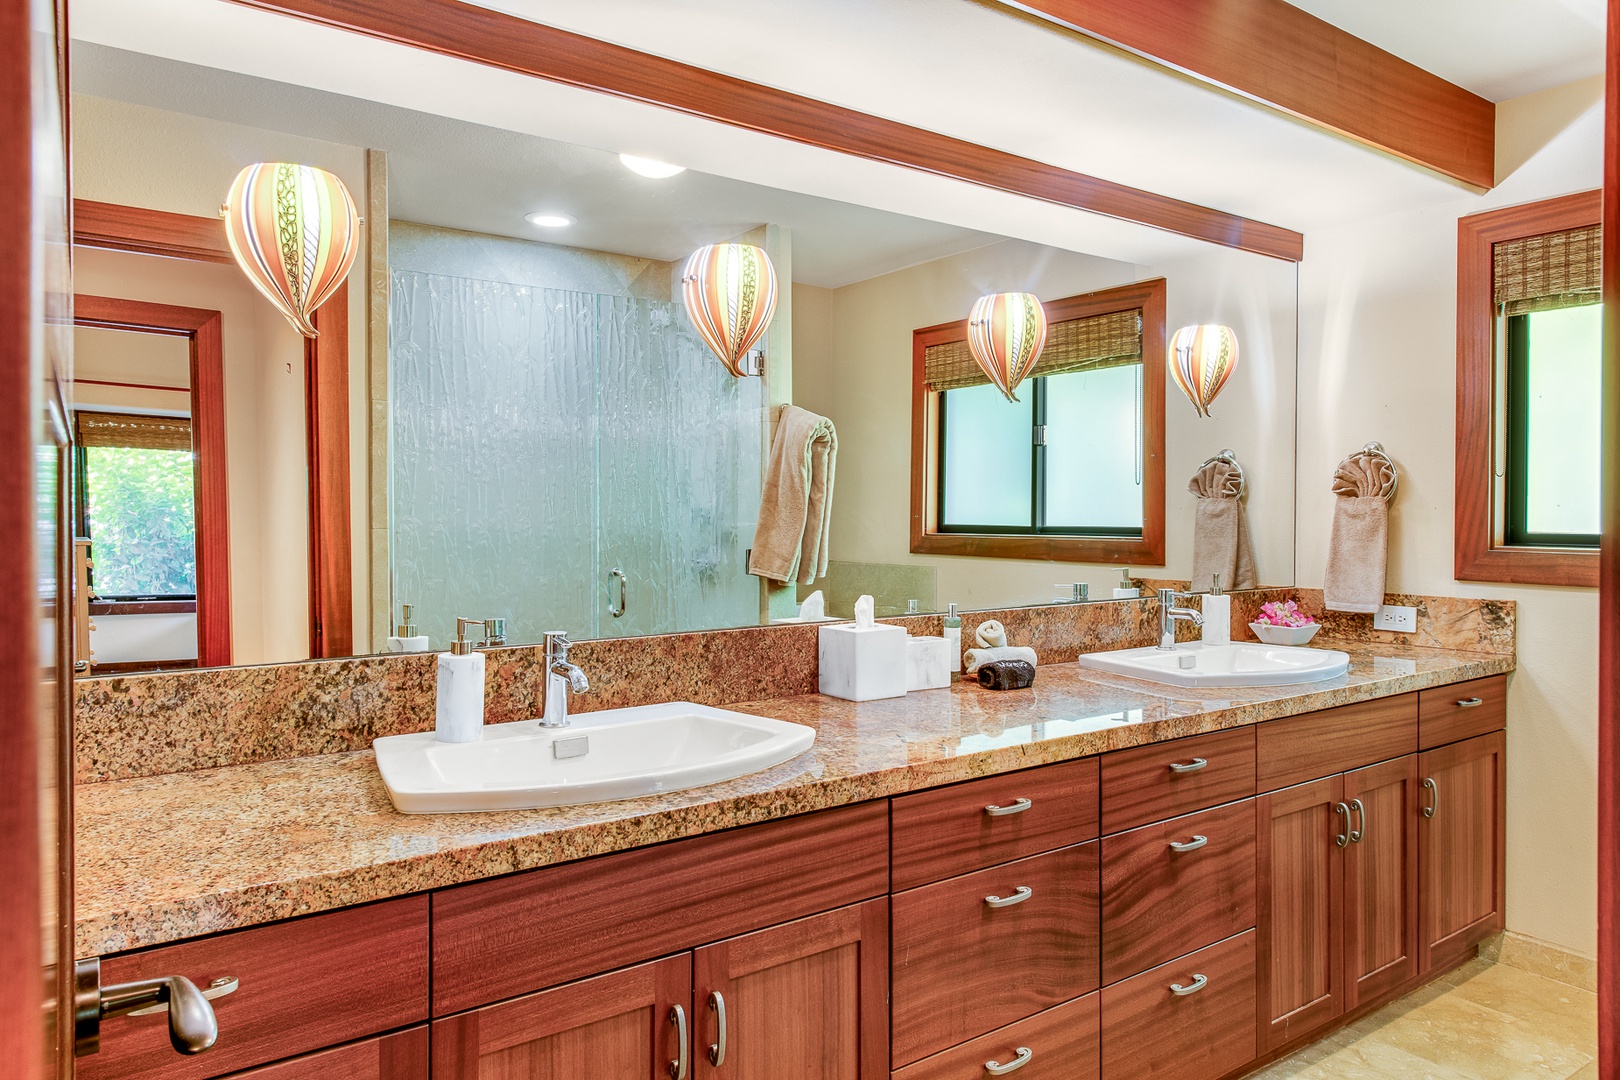 Kamuela Vacation Rentals, Olomana Hale at Kohala Ranch - A private ensuite bath with dual vanities, a large soaking tub, a separate water closet with a fancy Japanese toilet, and a spacious walk-in closet make pampering yourself a breeze!